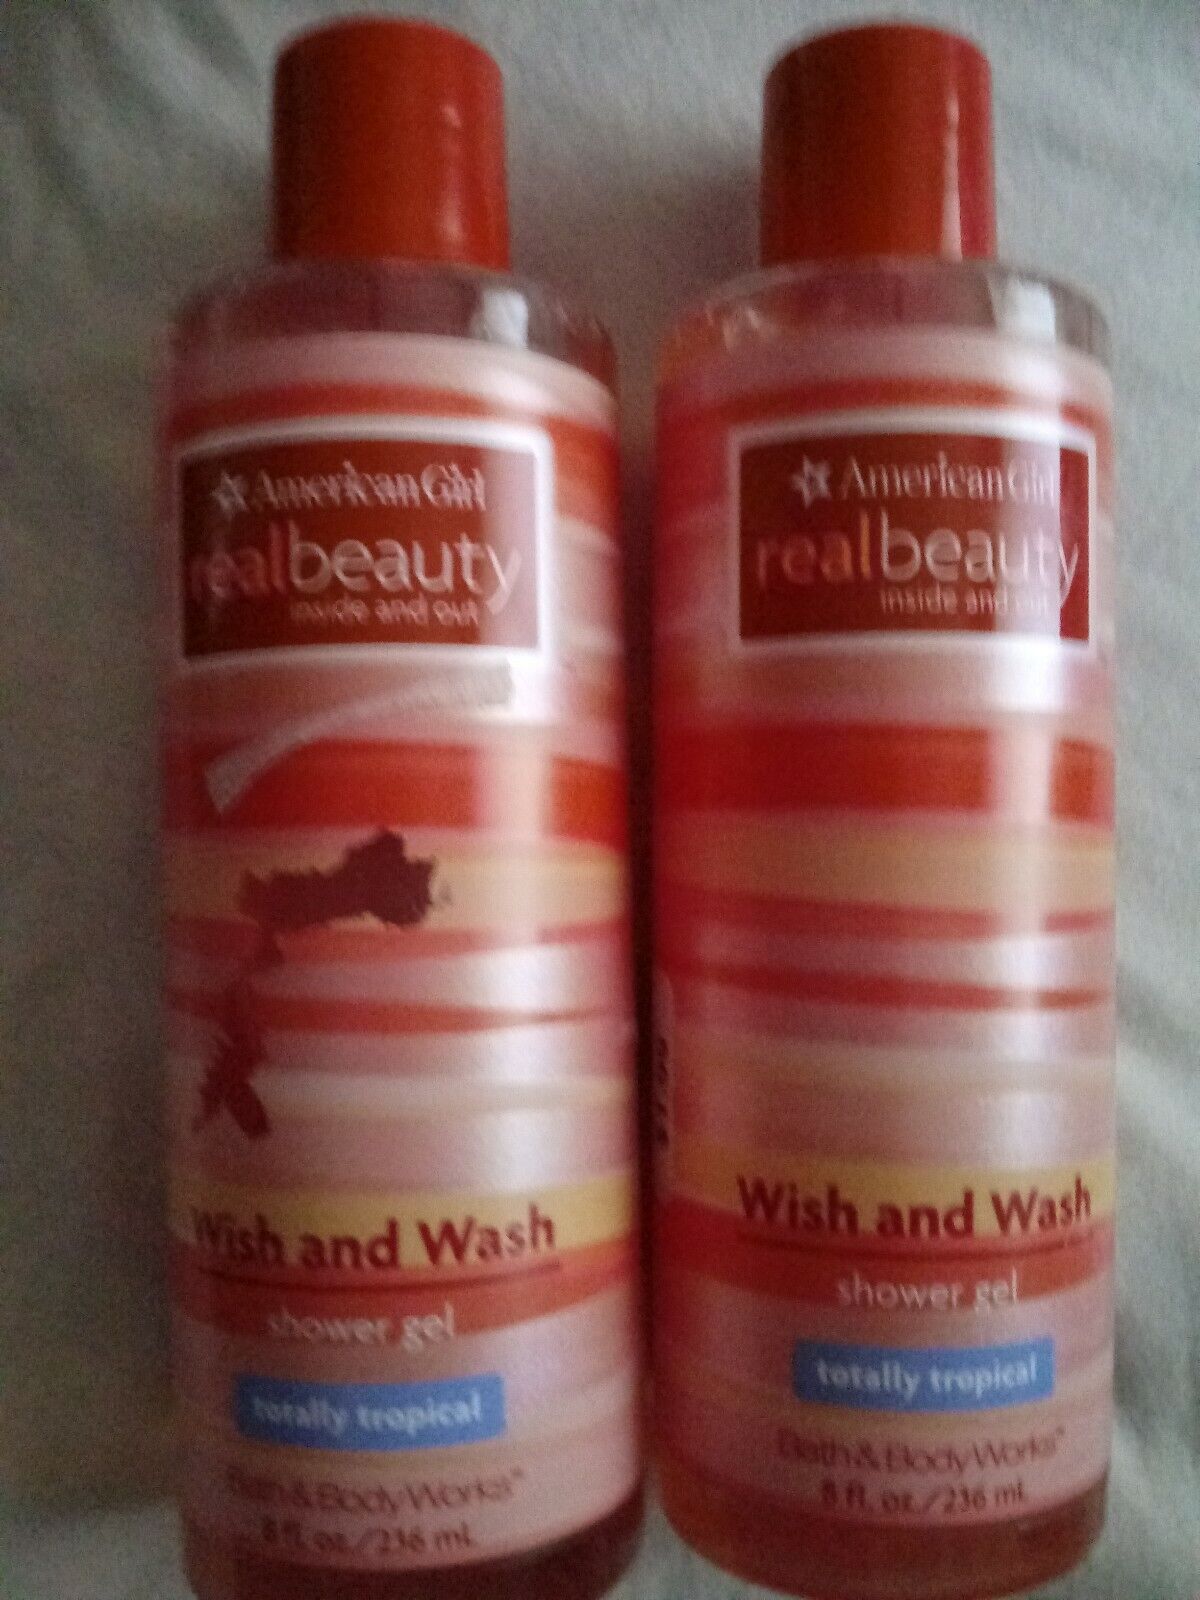 BBW AMERICAN GIRL REAL BEAUTY WISH & WASH SHOWER GEL TOTALLY TROPICAL (see DESC)